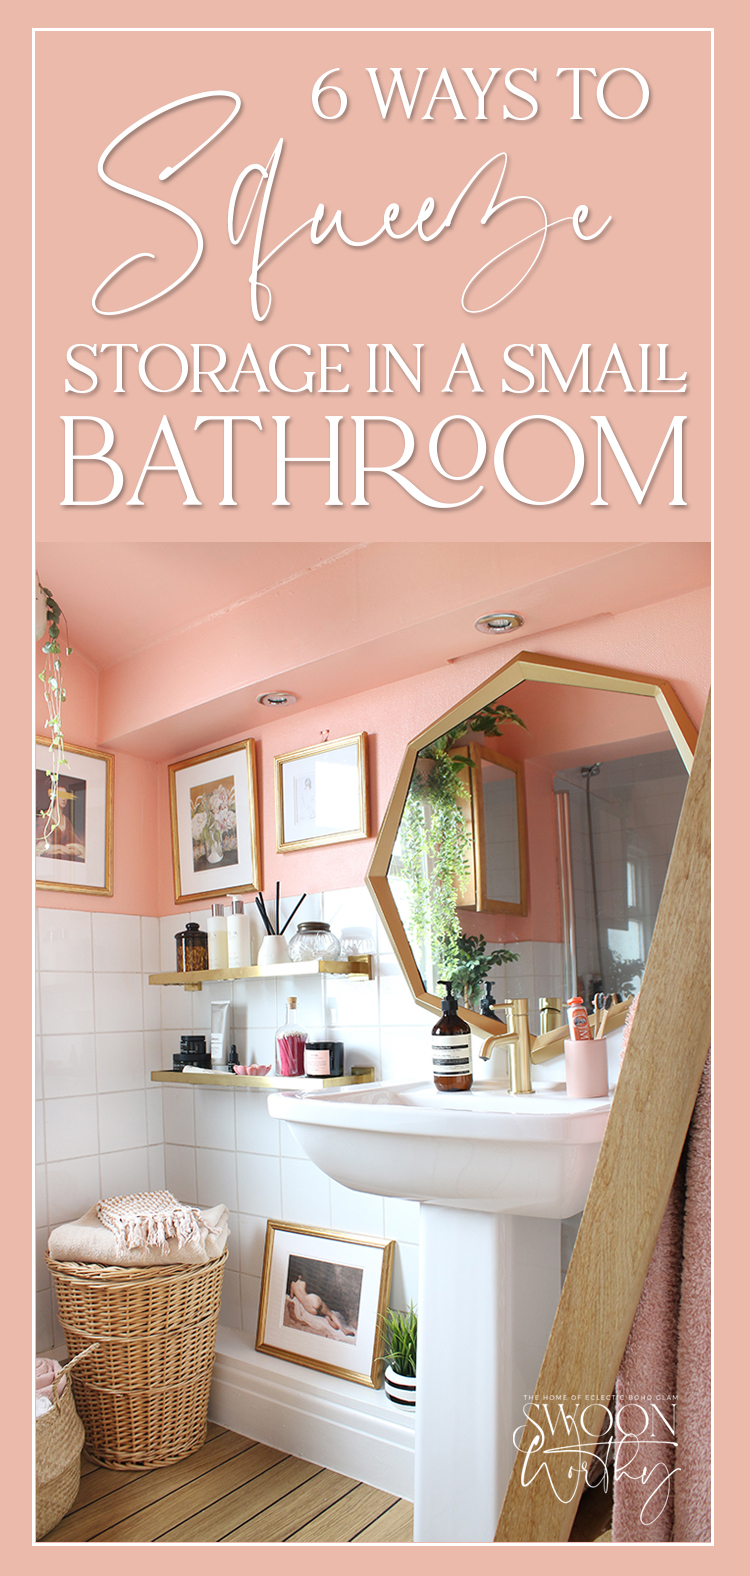 6 Ways to Squeeze Storage in a Small Bathroom